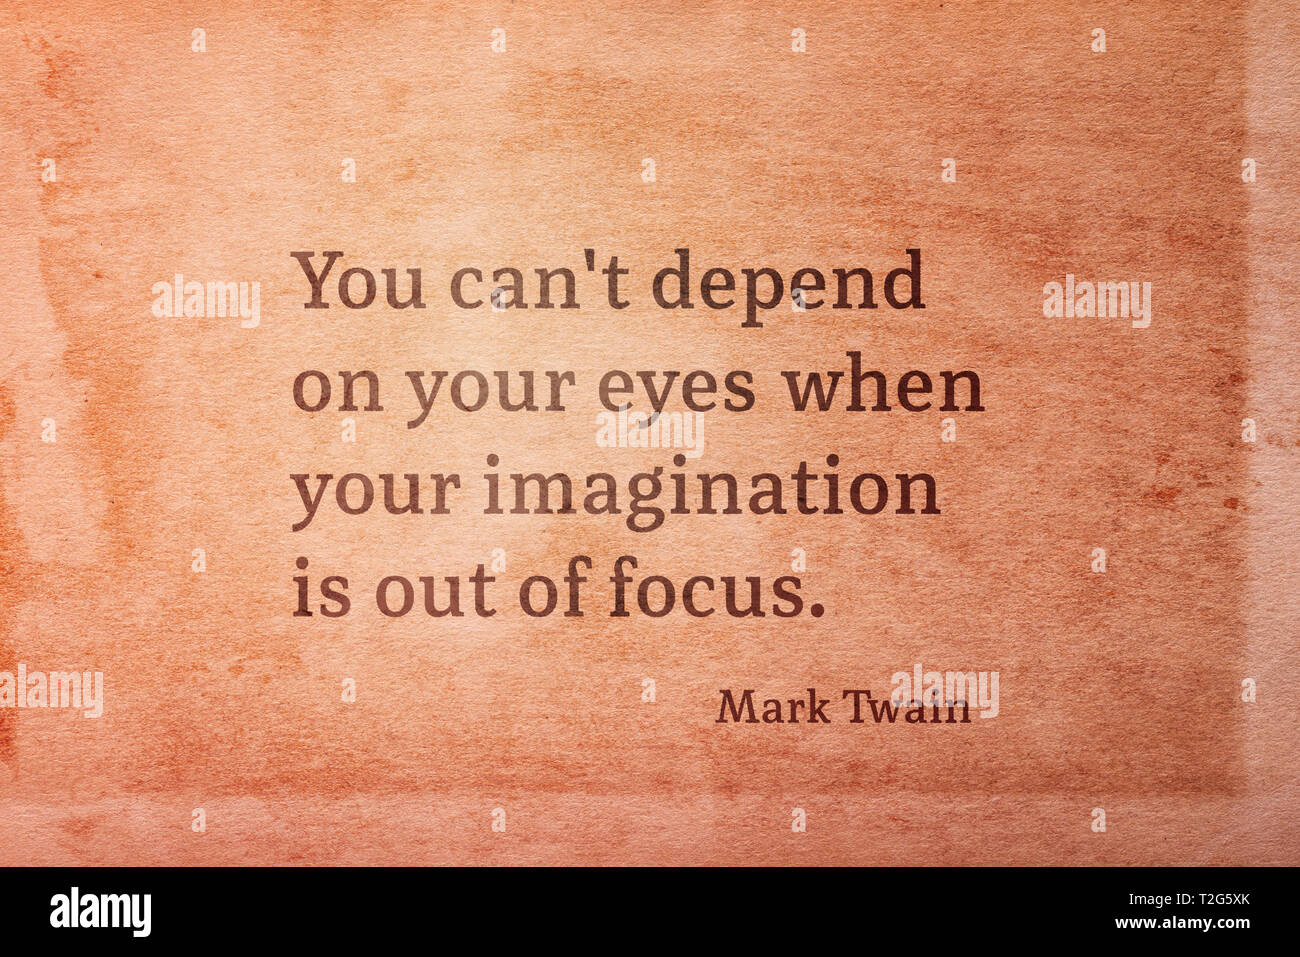 You can't depend on your eyes when your imagination is out of focus - famous American writer Mark Twain quote printed on vintage grunge paper Stock Photo